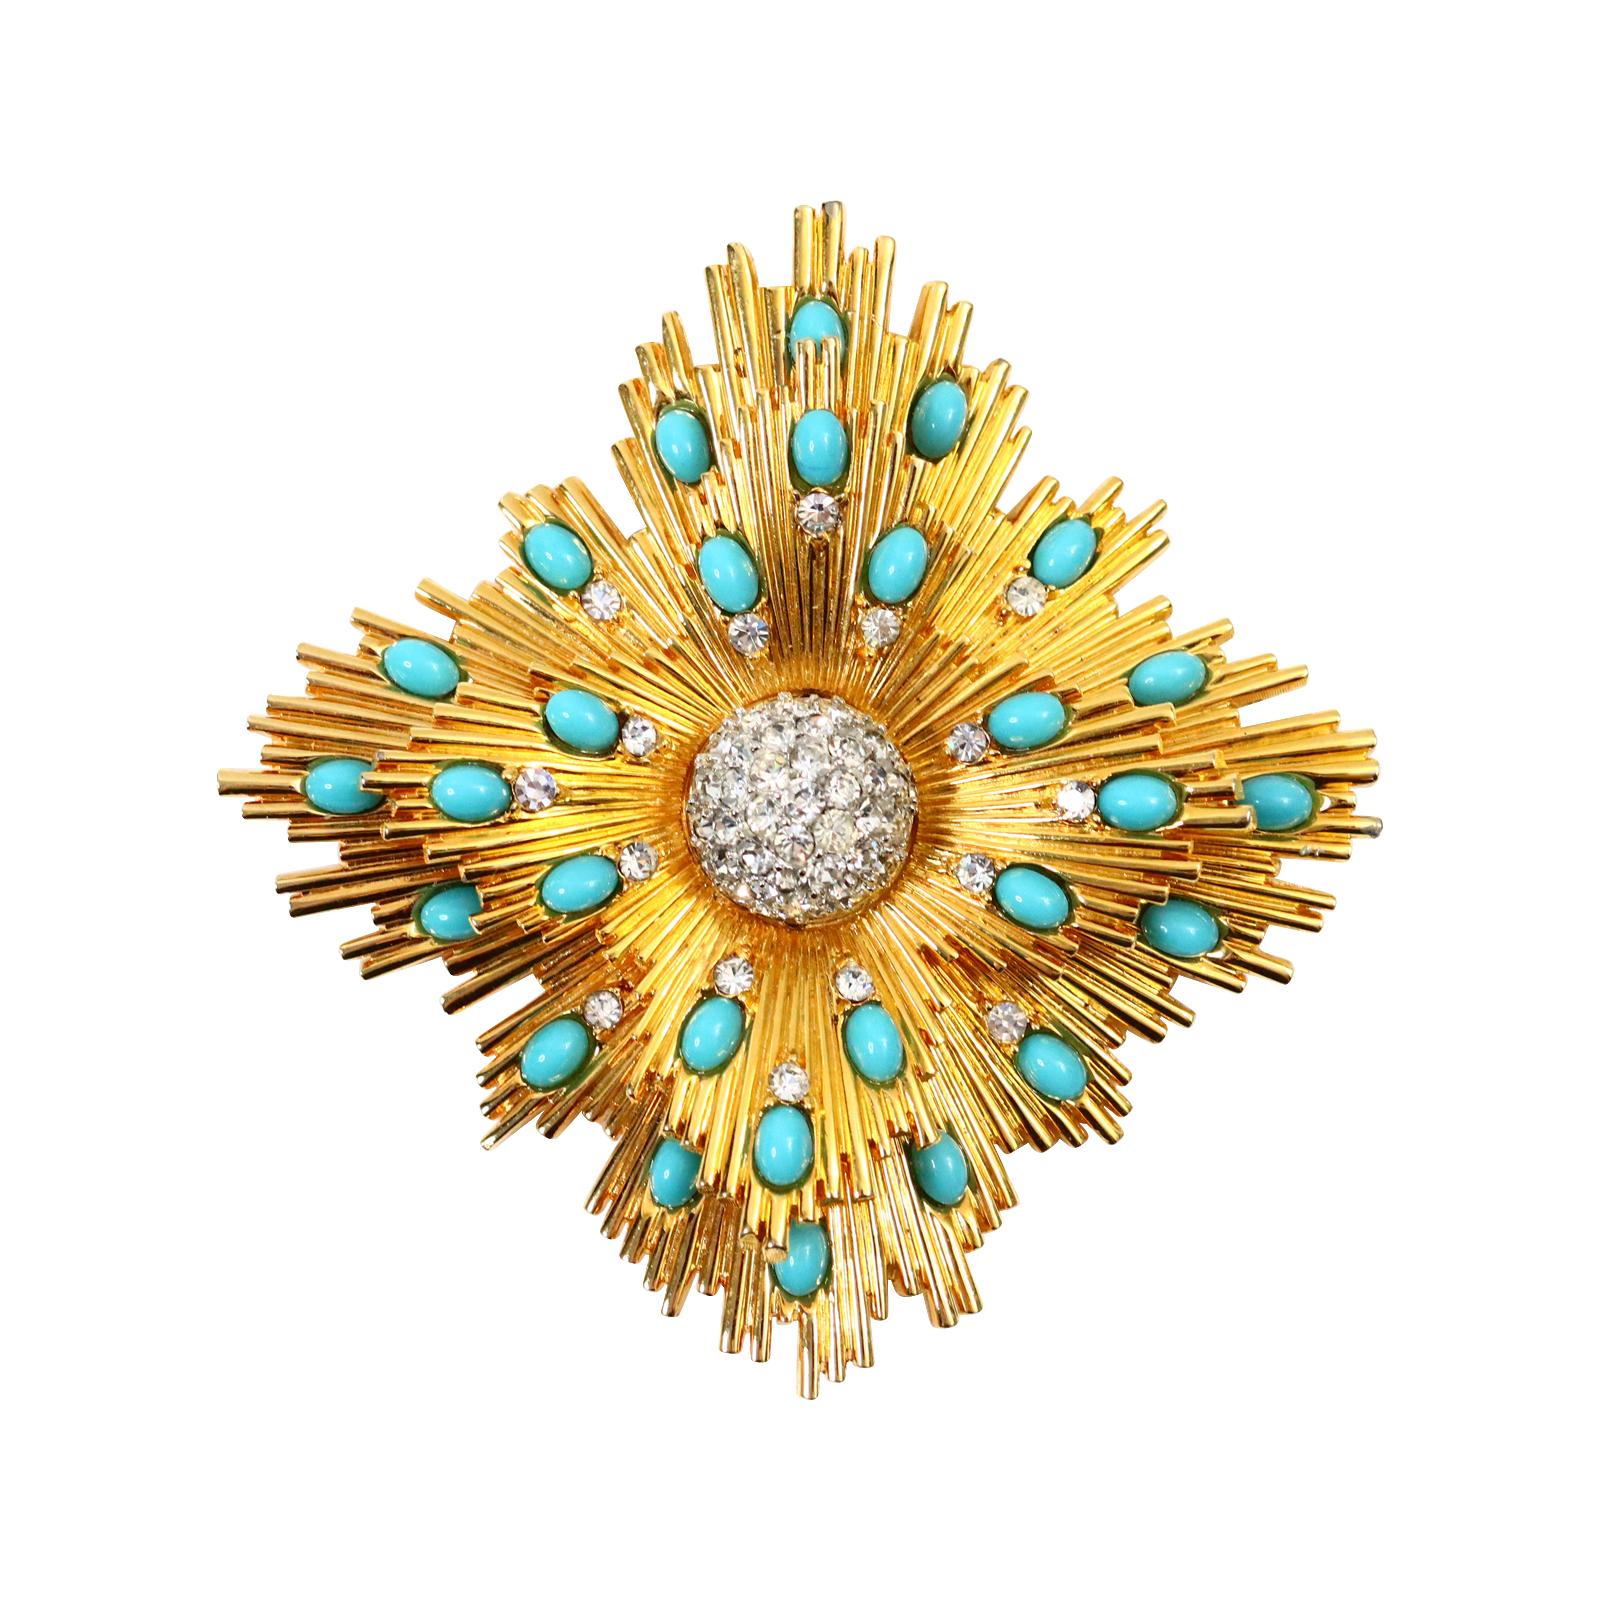 Vintage Jomaz Gold Diamante and Faux Turquoise Brooch Circa 1960s.  Now this is a brooch. It has two layers that seem to elevate slightly upwards.  The piece in the middle is domed pave and then have pieces of faux turquoise all around as well as